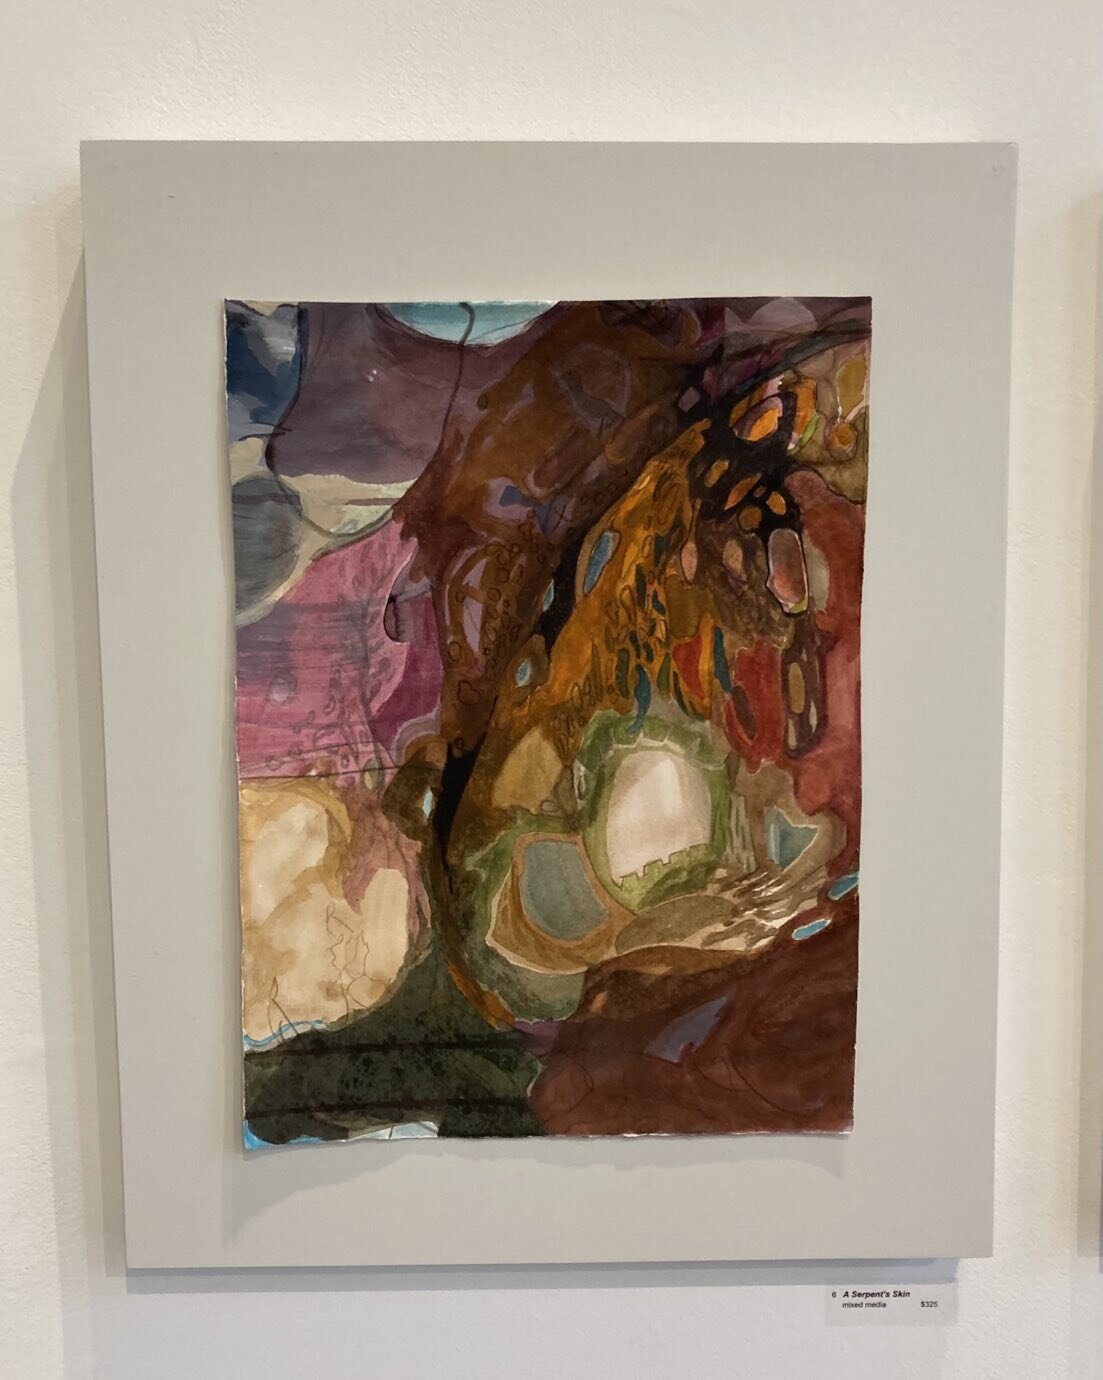 Thank you for your response, feedback and attendance.

#carnegiegallery#darkforest
#artshow#hamiltonart#abstraction
#cathyyantsis#painting
#sculptures#journey#artshow